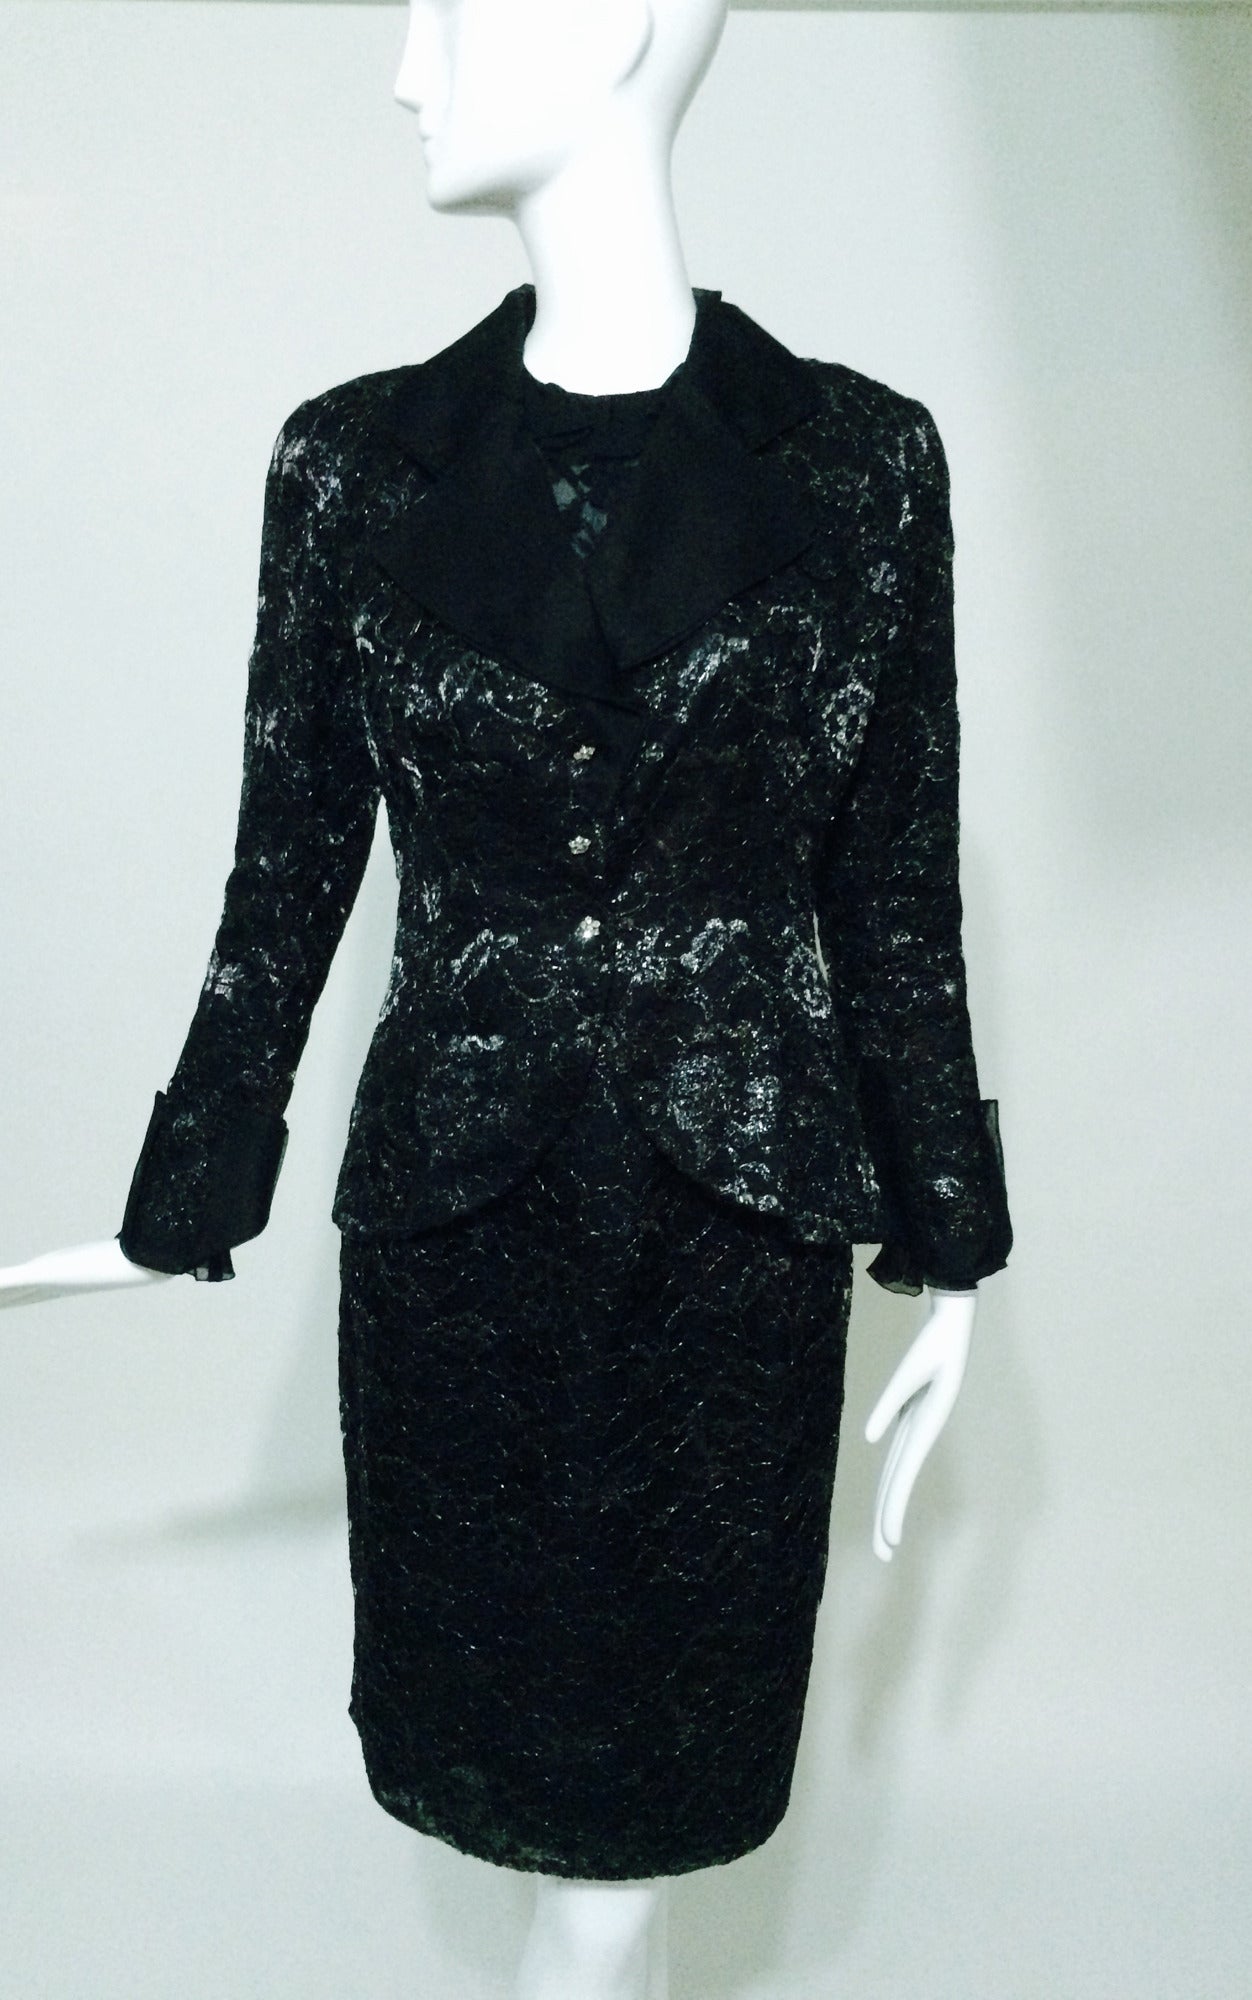 Christian Dior Boutique numbered black & silver lace skirt set with coordinating lace blouse.
The fitted lace jacket has a nipped waist with wide lapels and deep turn back cuffs of black silk organza, it closes at the front with decorative